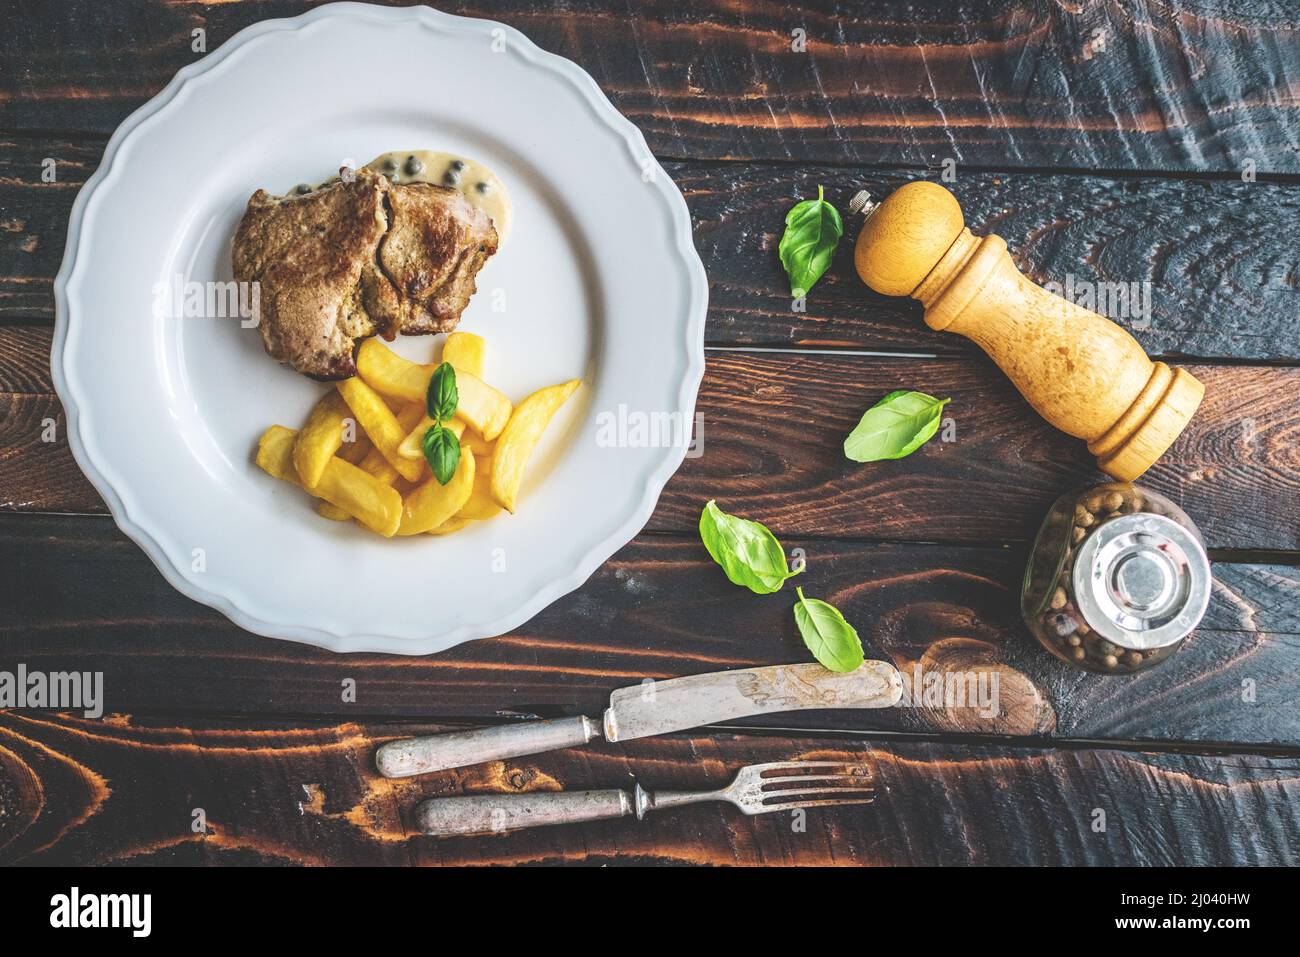 Grilled pork neck with pepper sauce and potato fries on wooden table Stock Photo